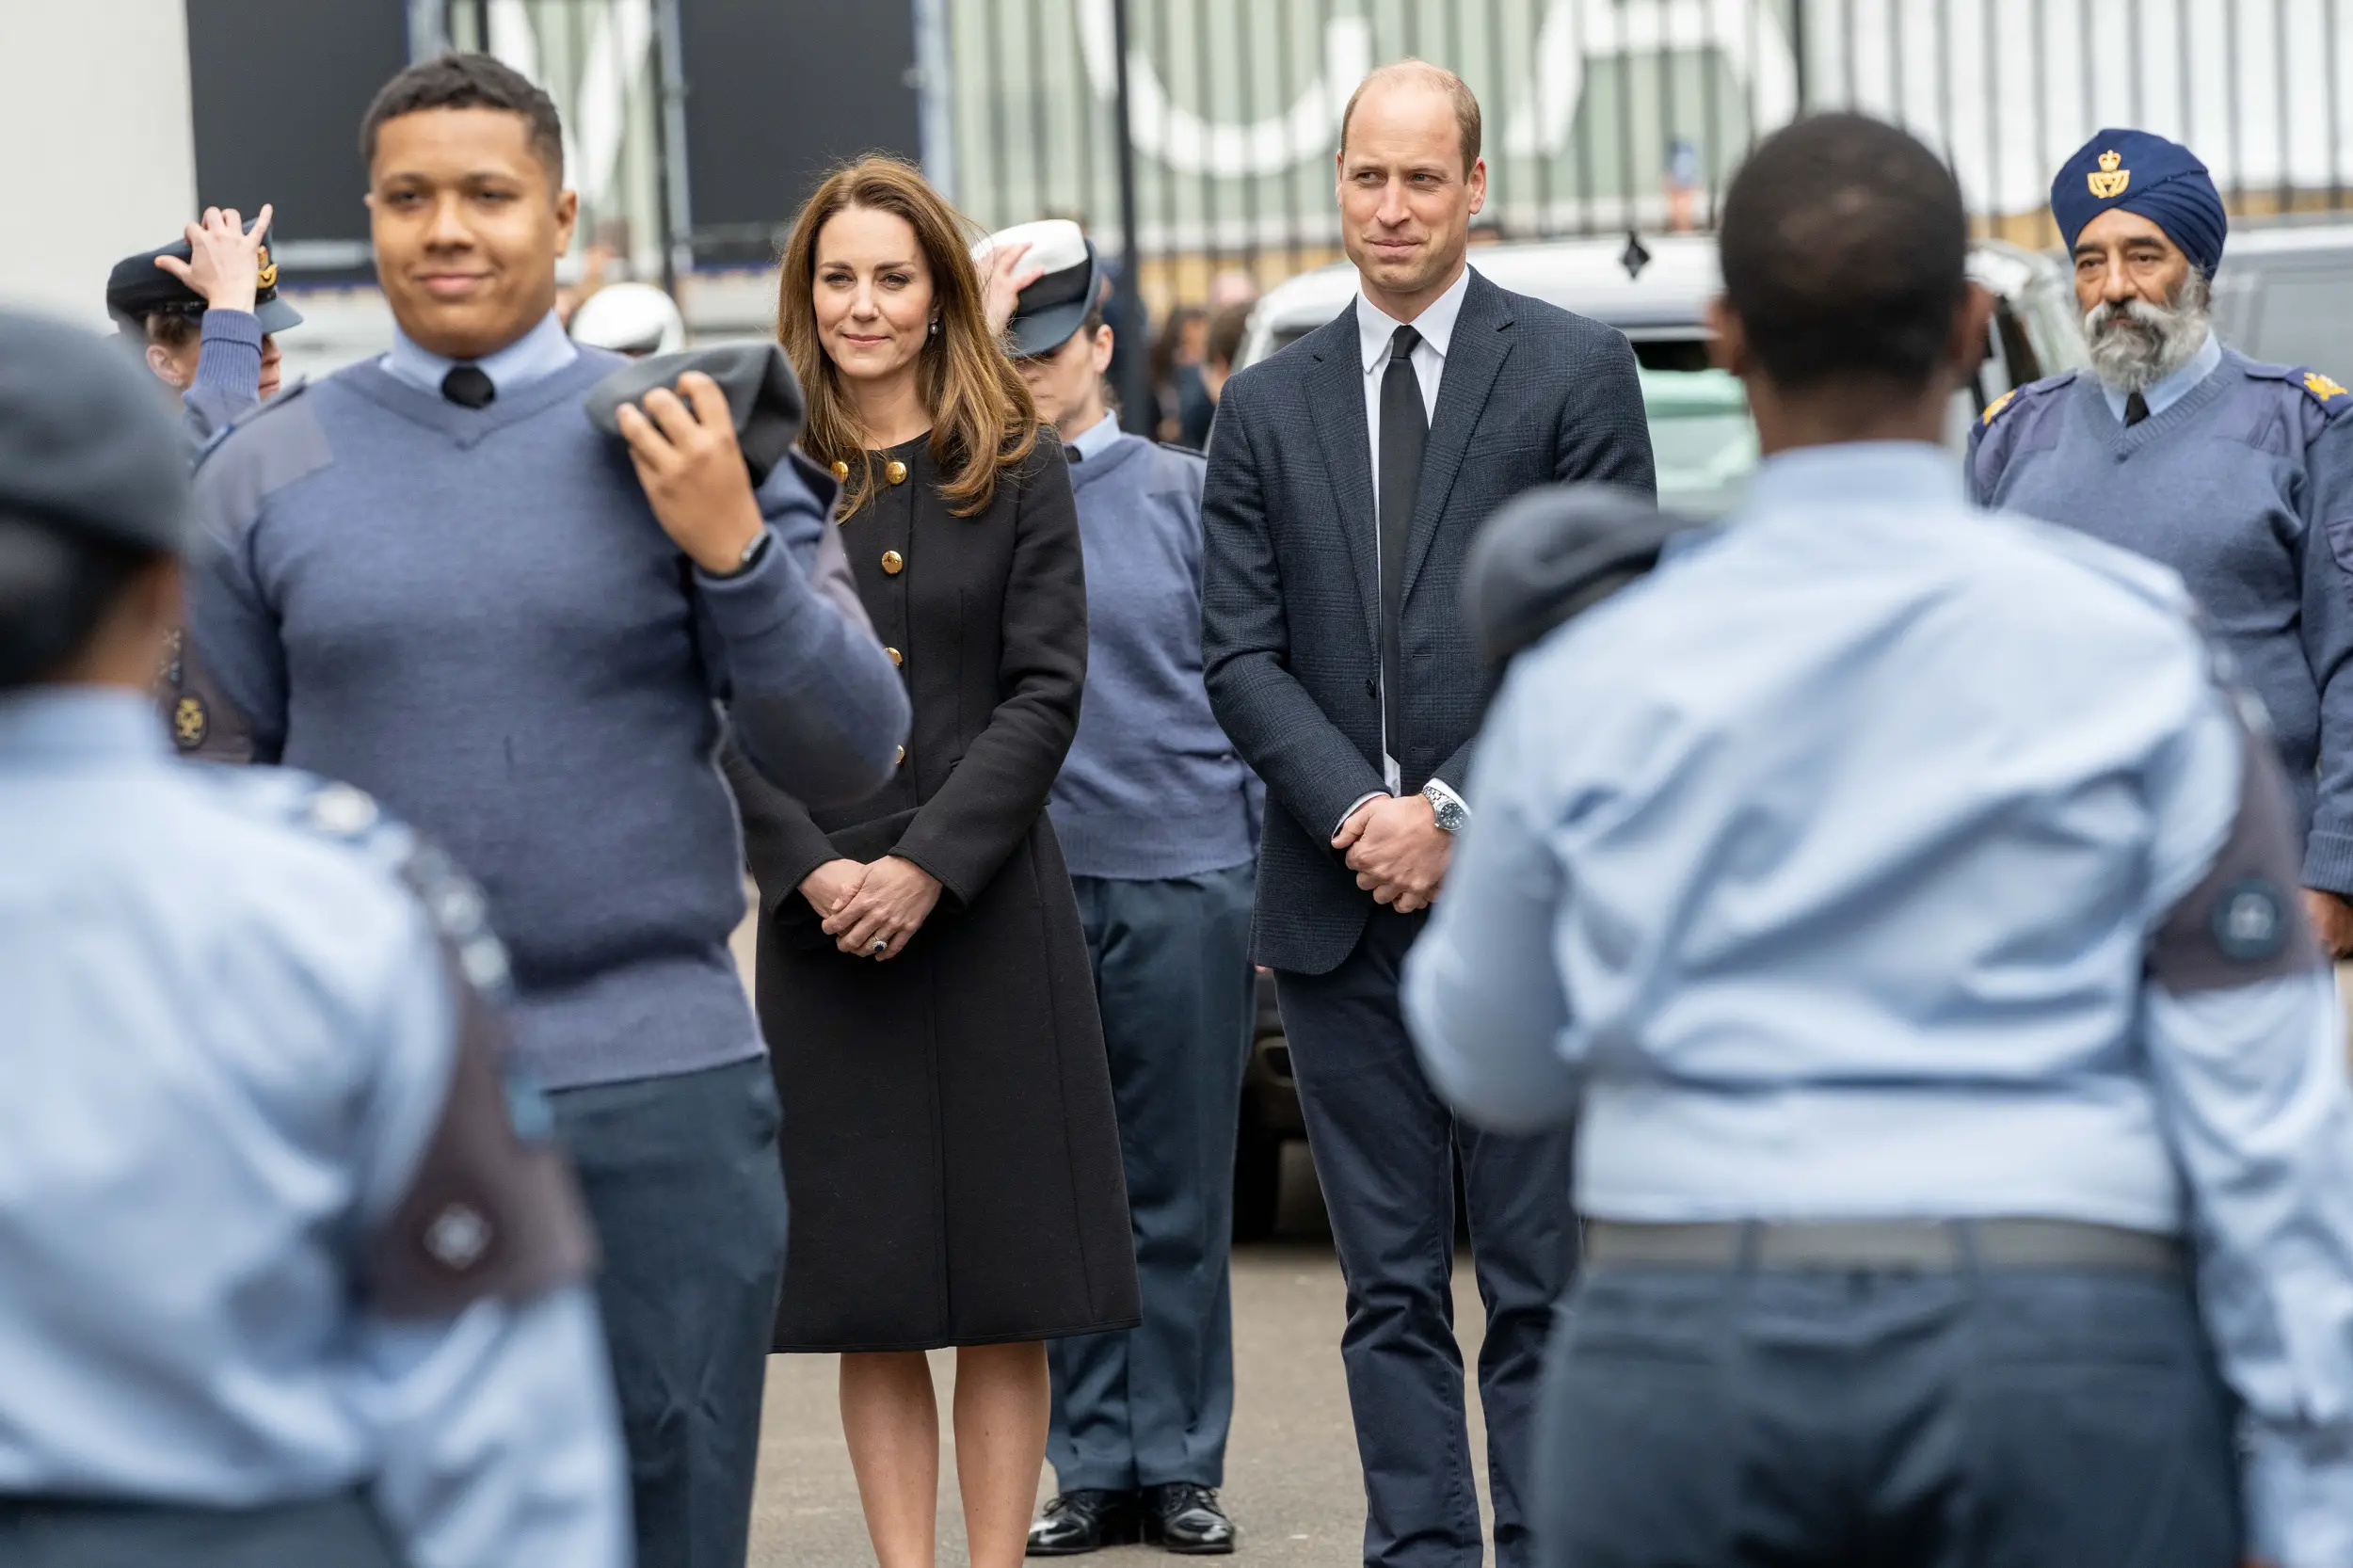 The Duke and Duchess of Cambridge paid tribute to the Prince Philip by visiting Air Cadets